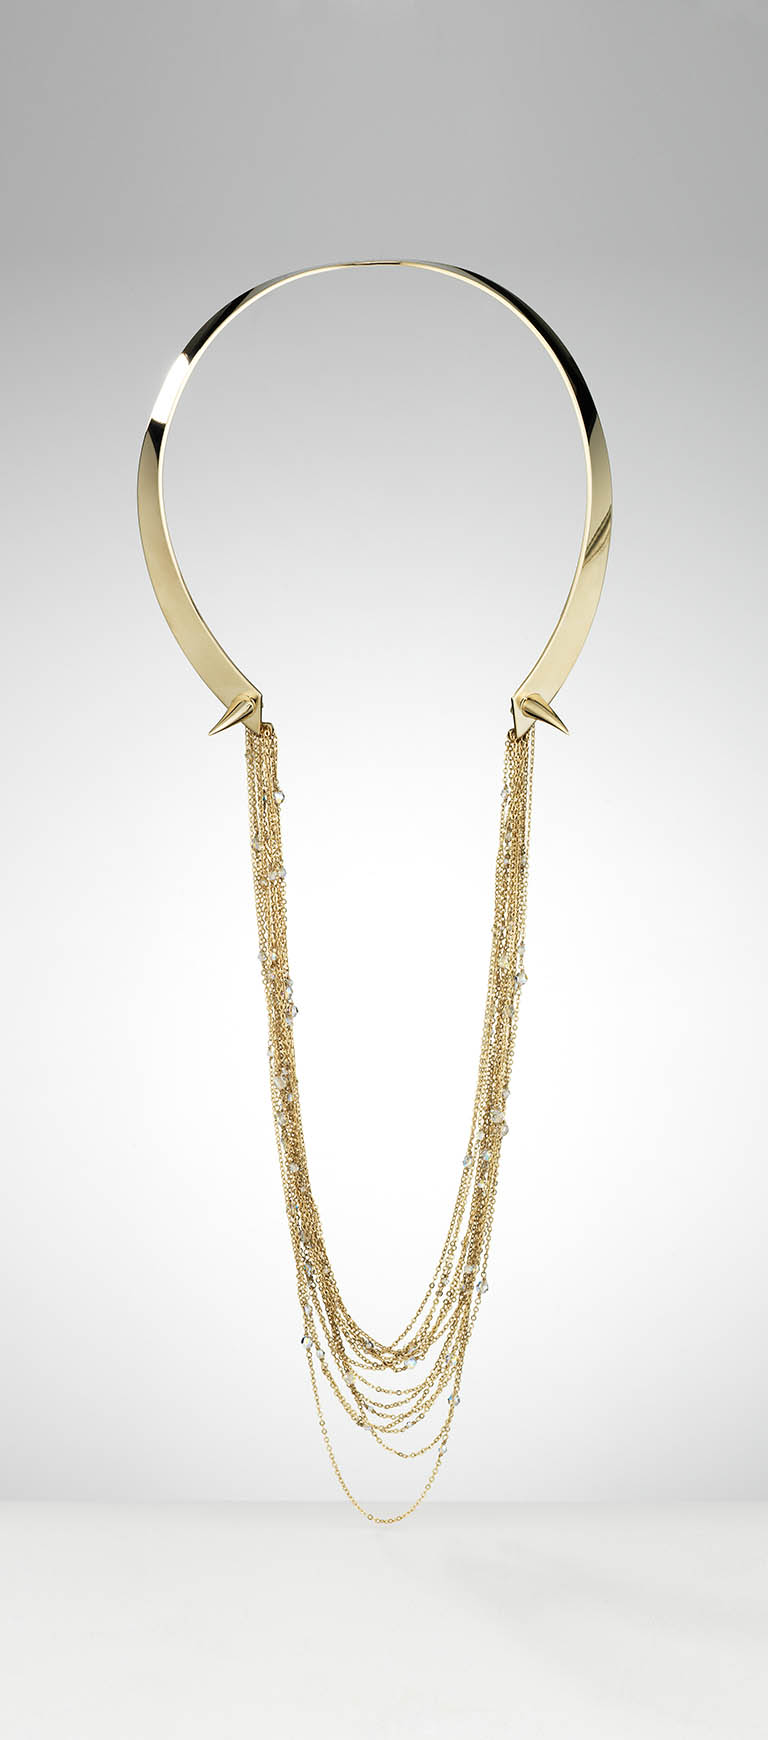 Packshot Factory - Necklace - Eden Diodati gold necklace with chain